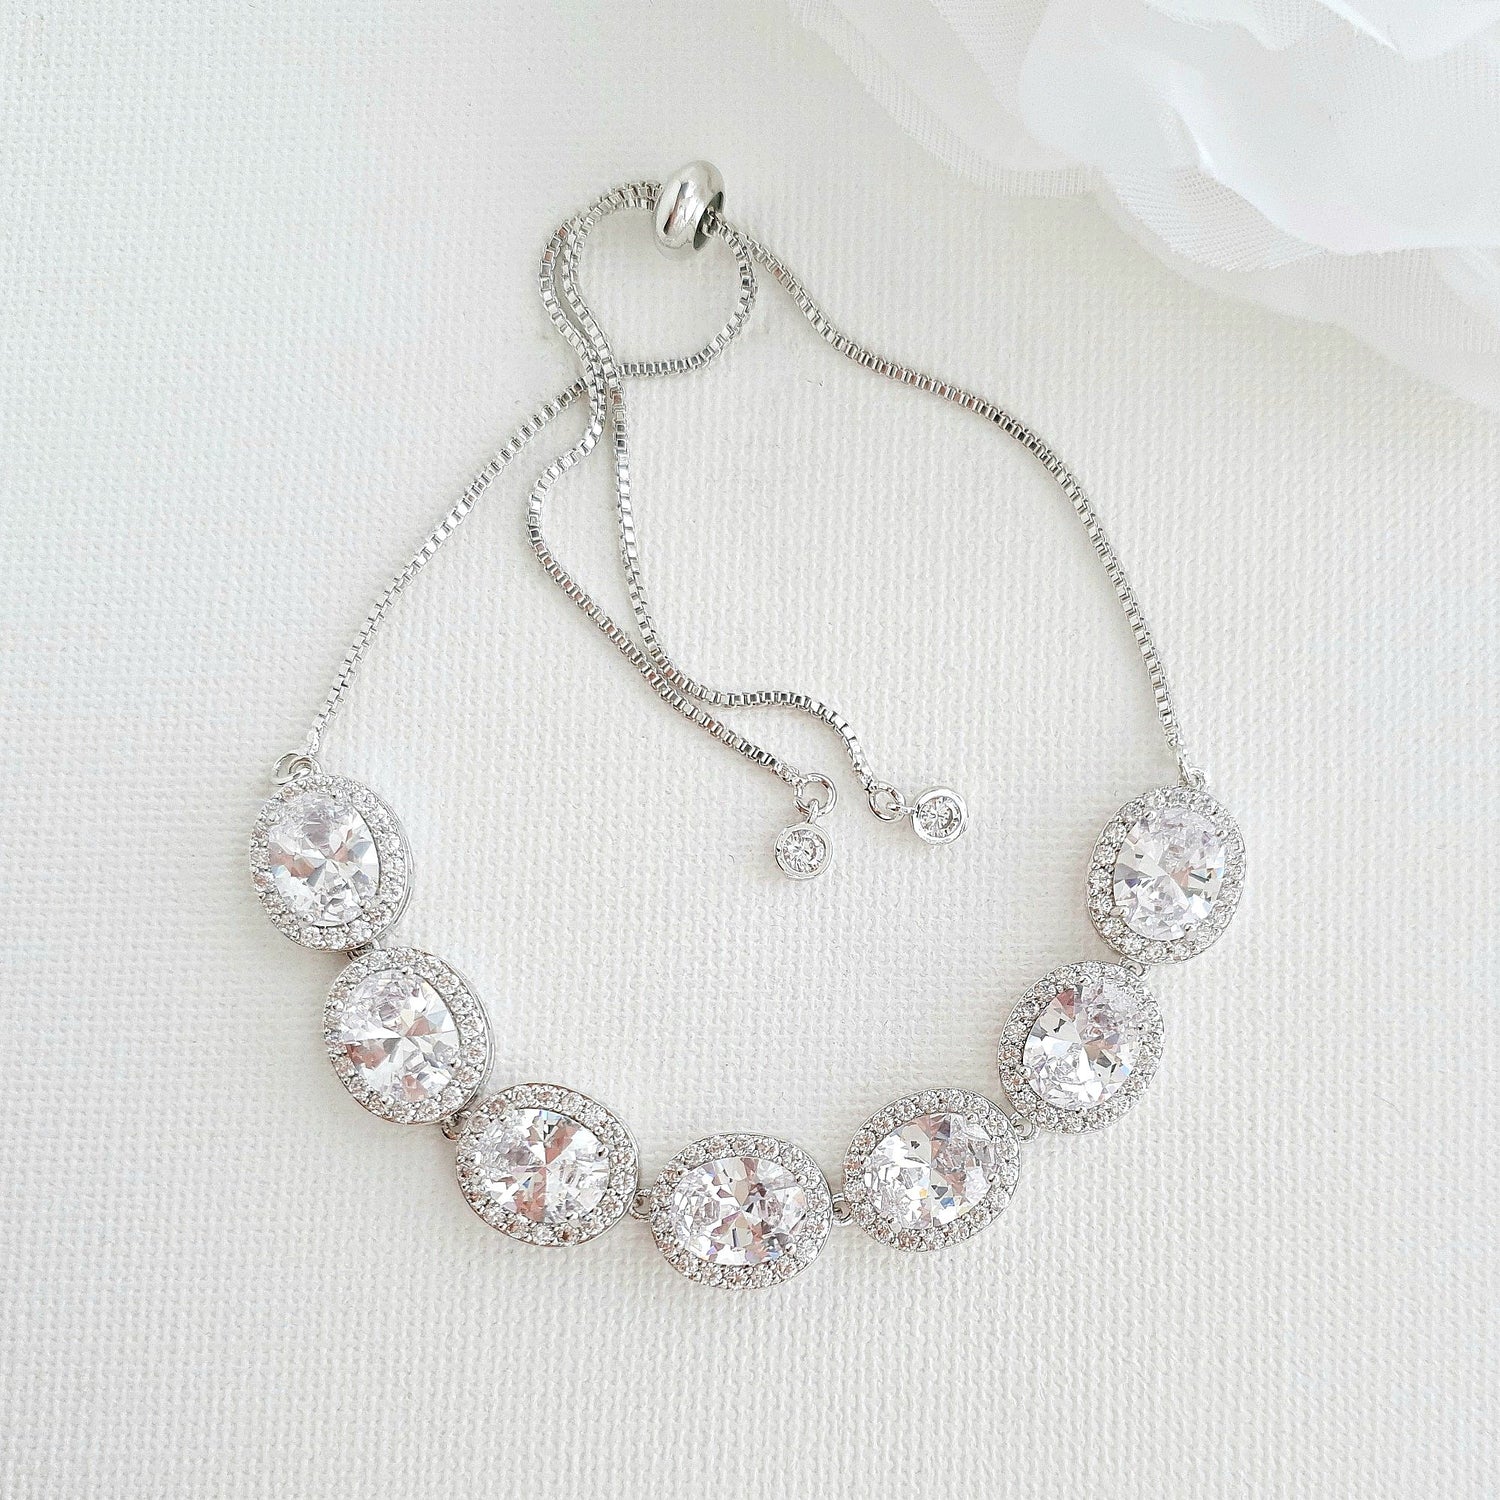 Silver and Crystal Bracelet for Weddings- Emily - PoetryDesigns